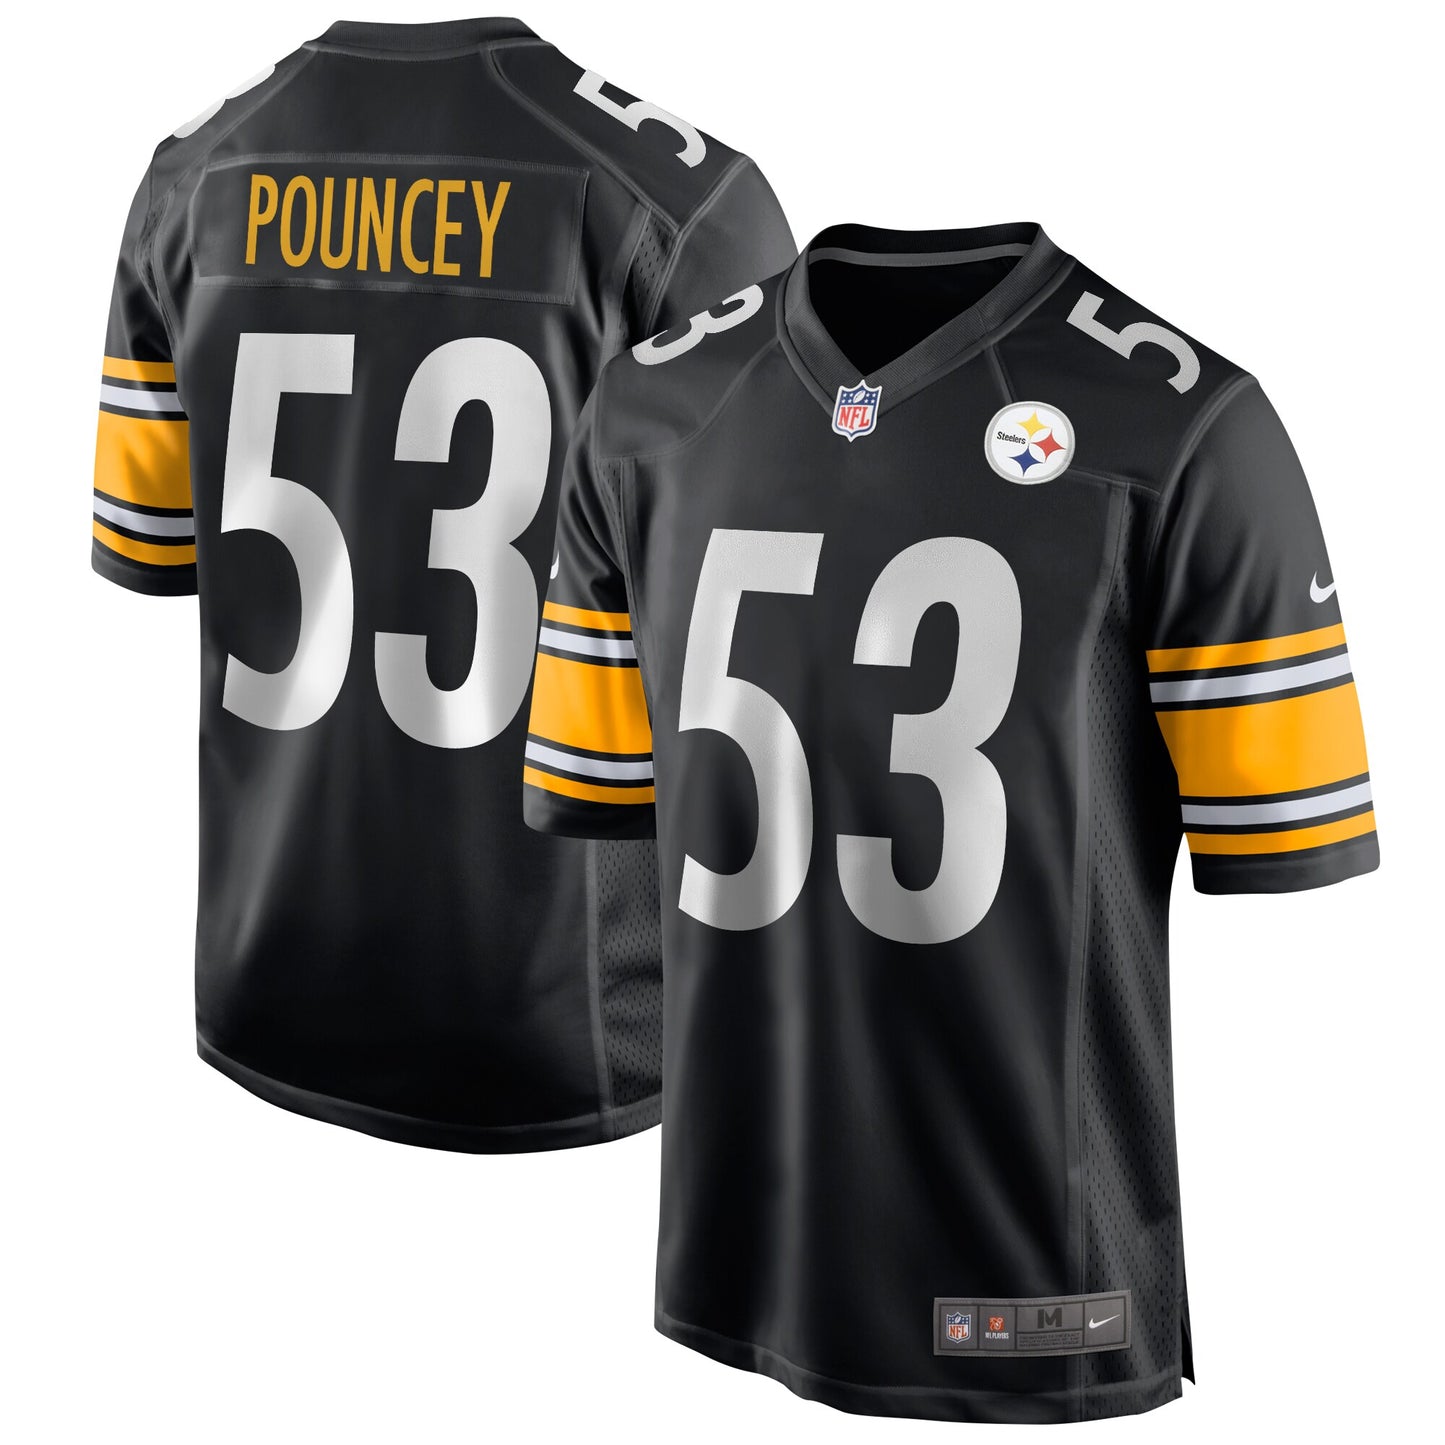 Maurkice Pouncey Pittsburgh Steelers Nike Game Jersey - Black